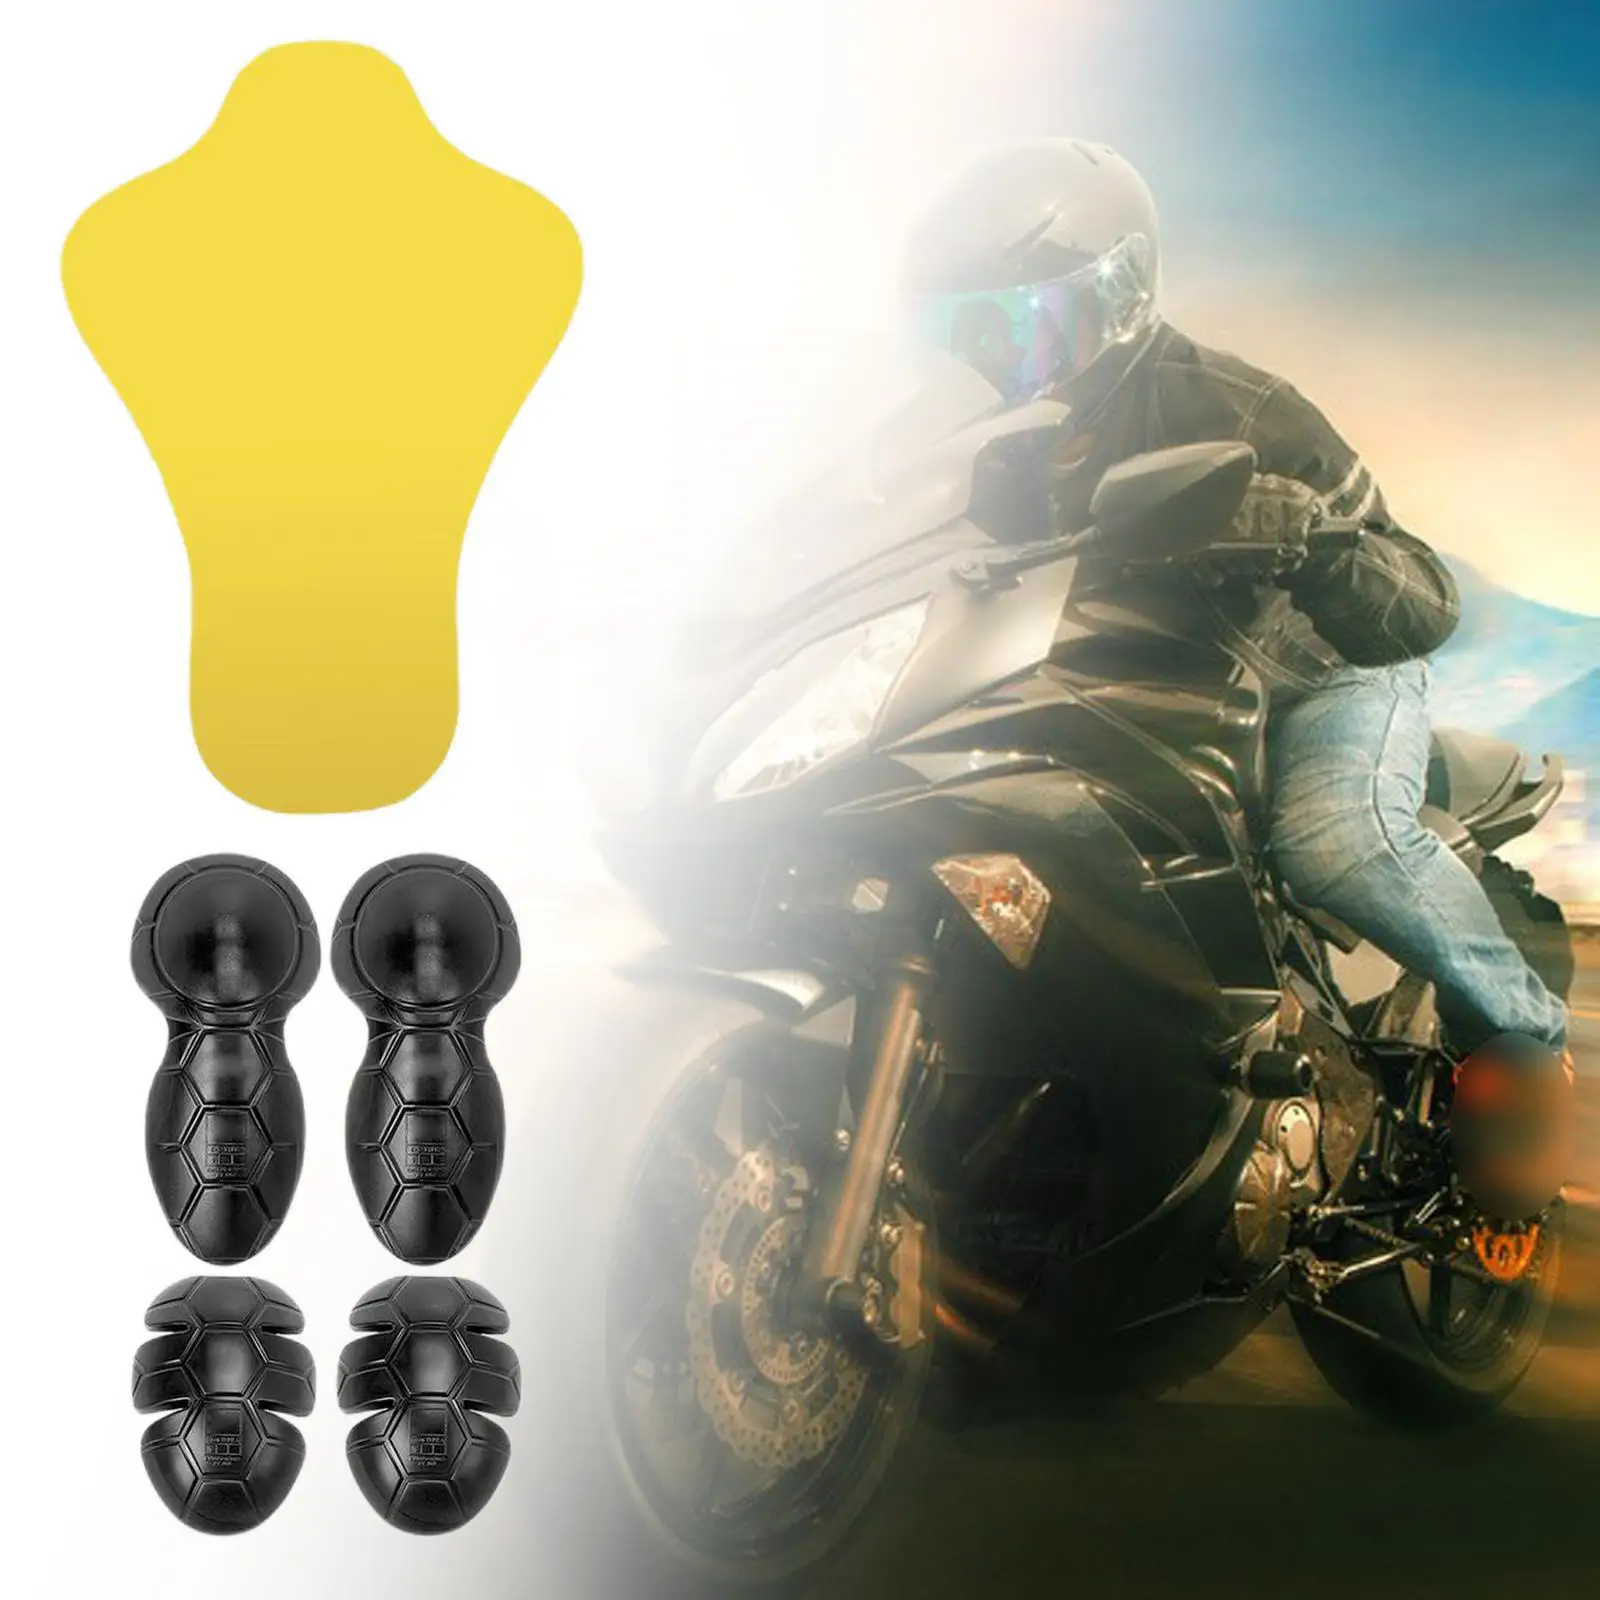 5 Pieces Motorcycle Armor Riding Pads Guards Jacket Protective Inside Gear Armor Vest Racing Guard Motorcycle Biker Equipment